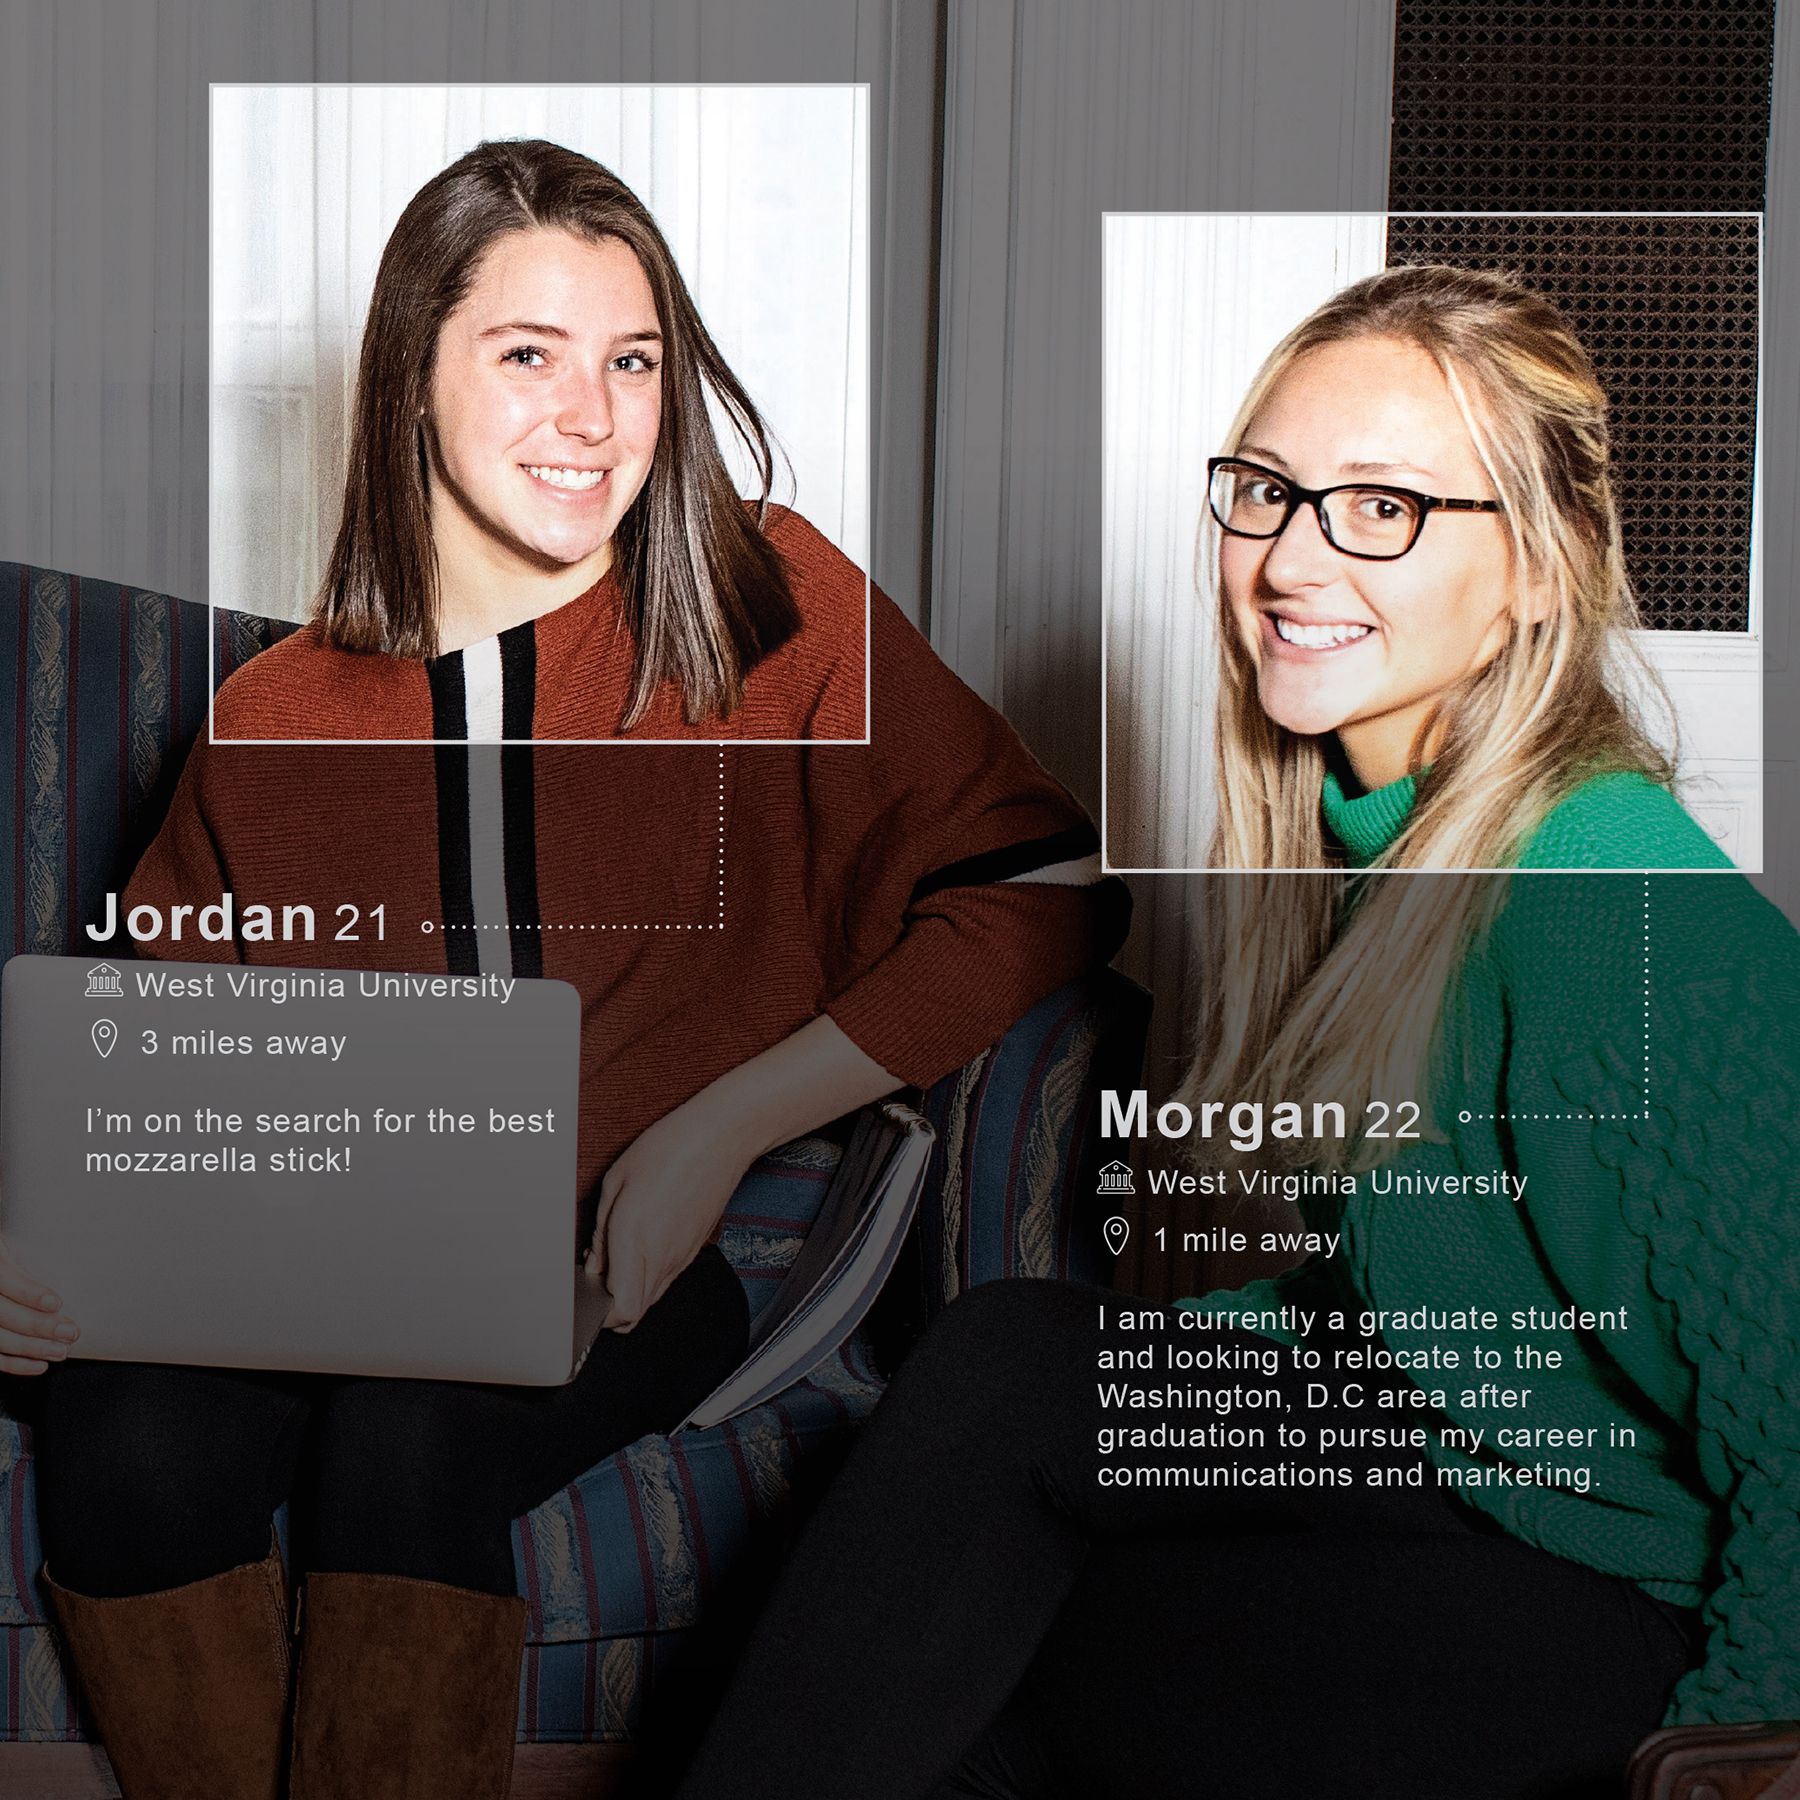 Image of two women with dating profiles superimposed over the group shot for each.